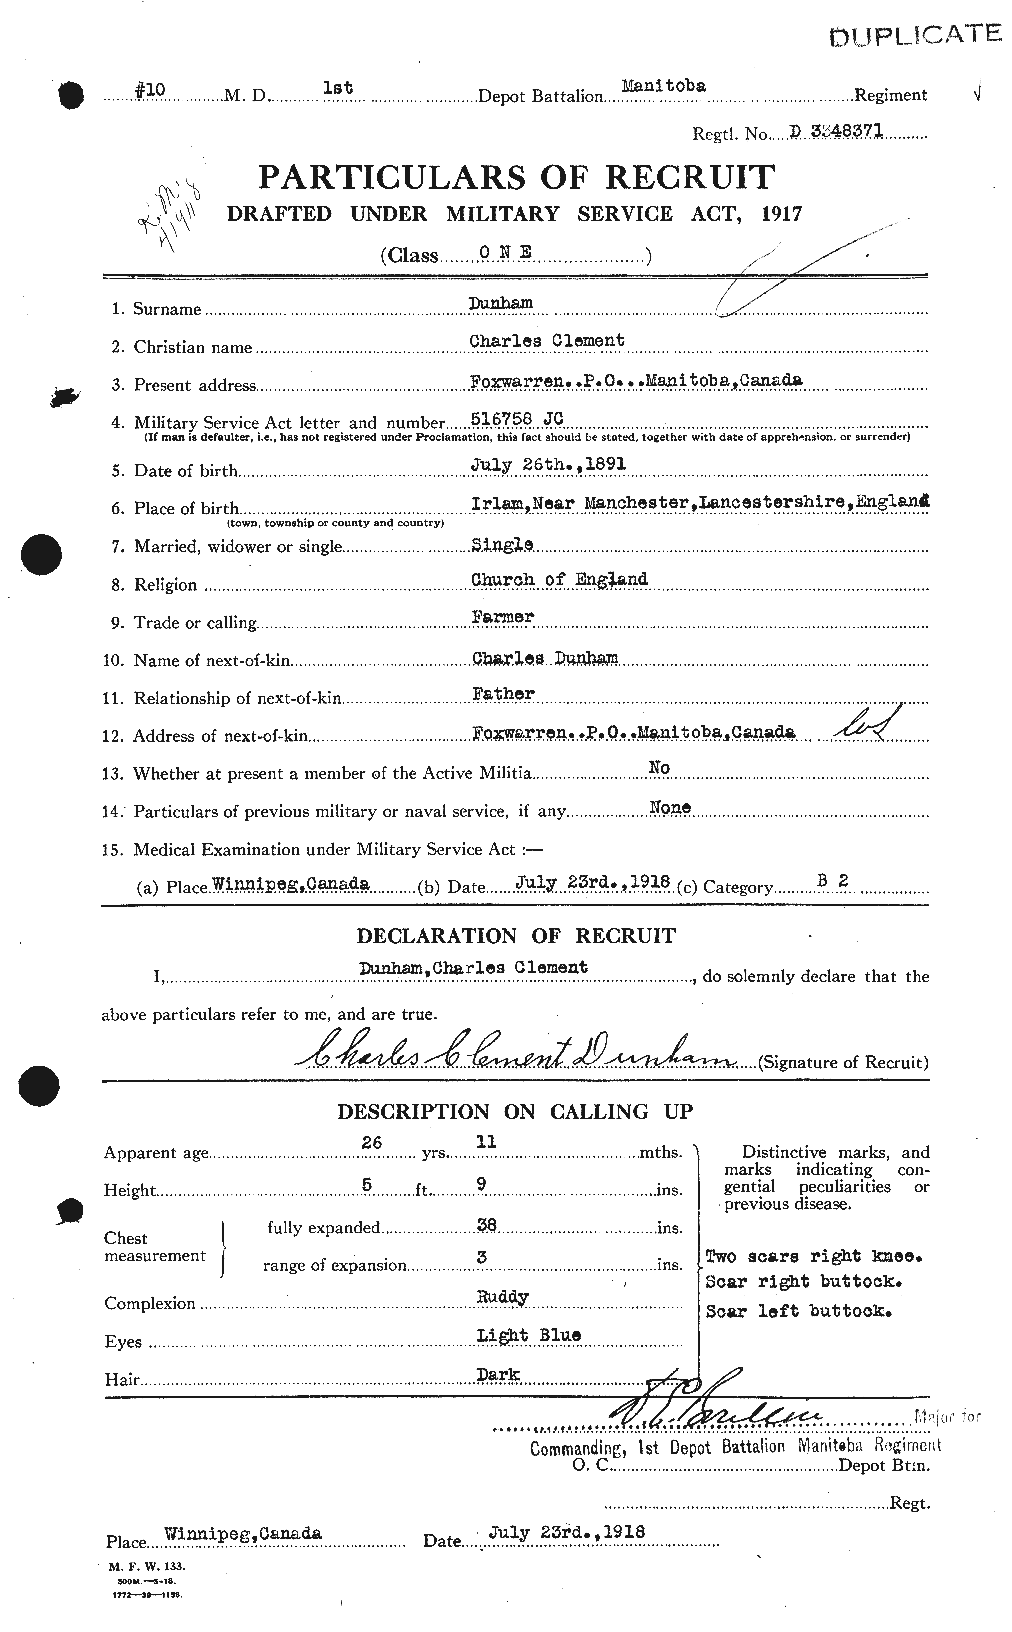 Personnel Records of the First World War - CEF 302513a